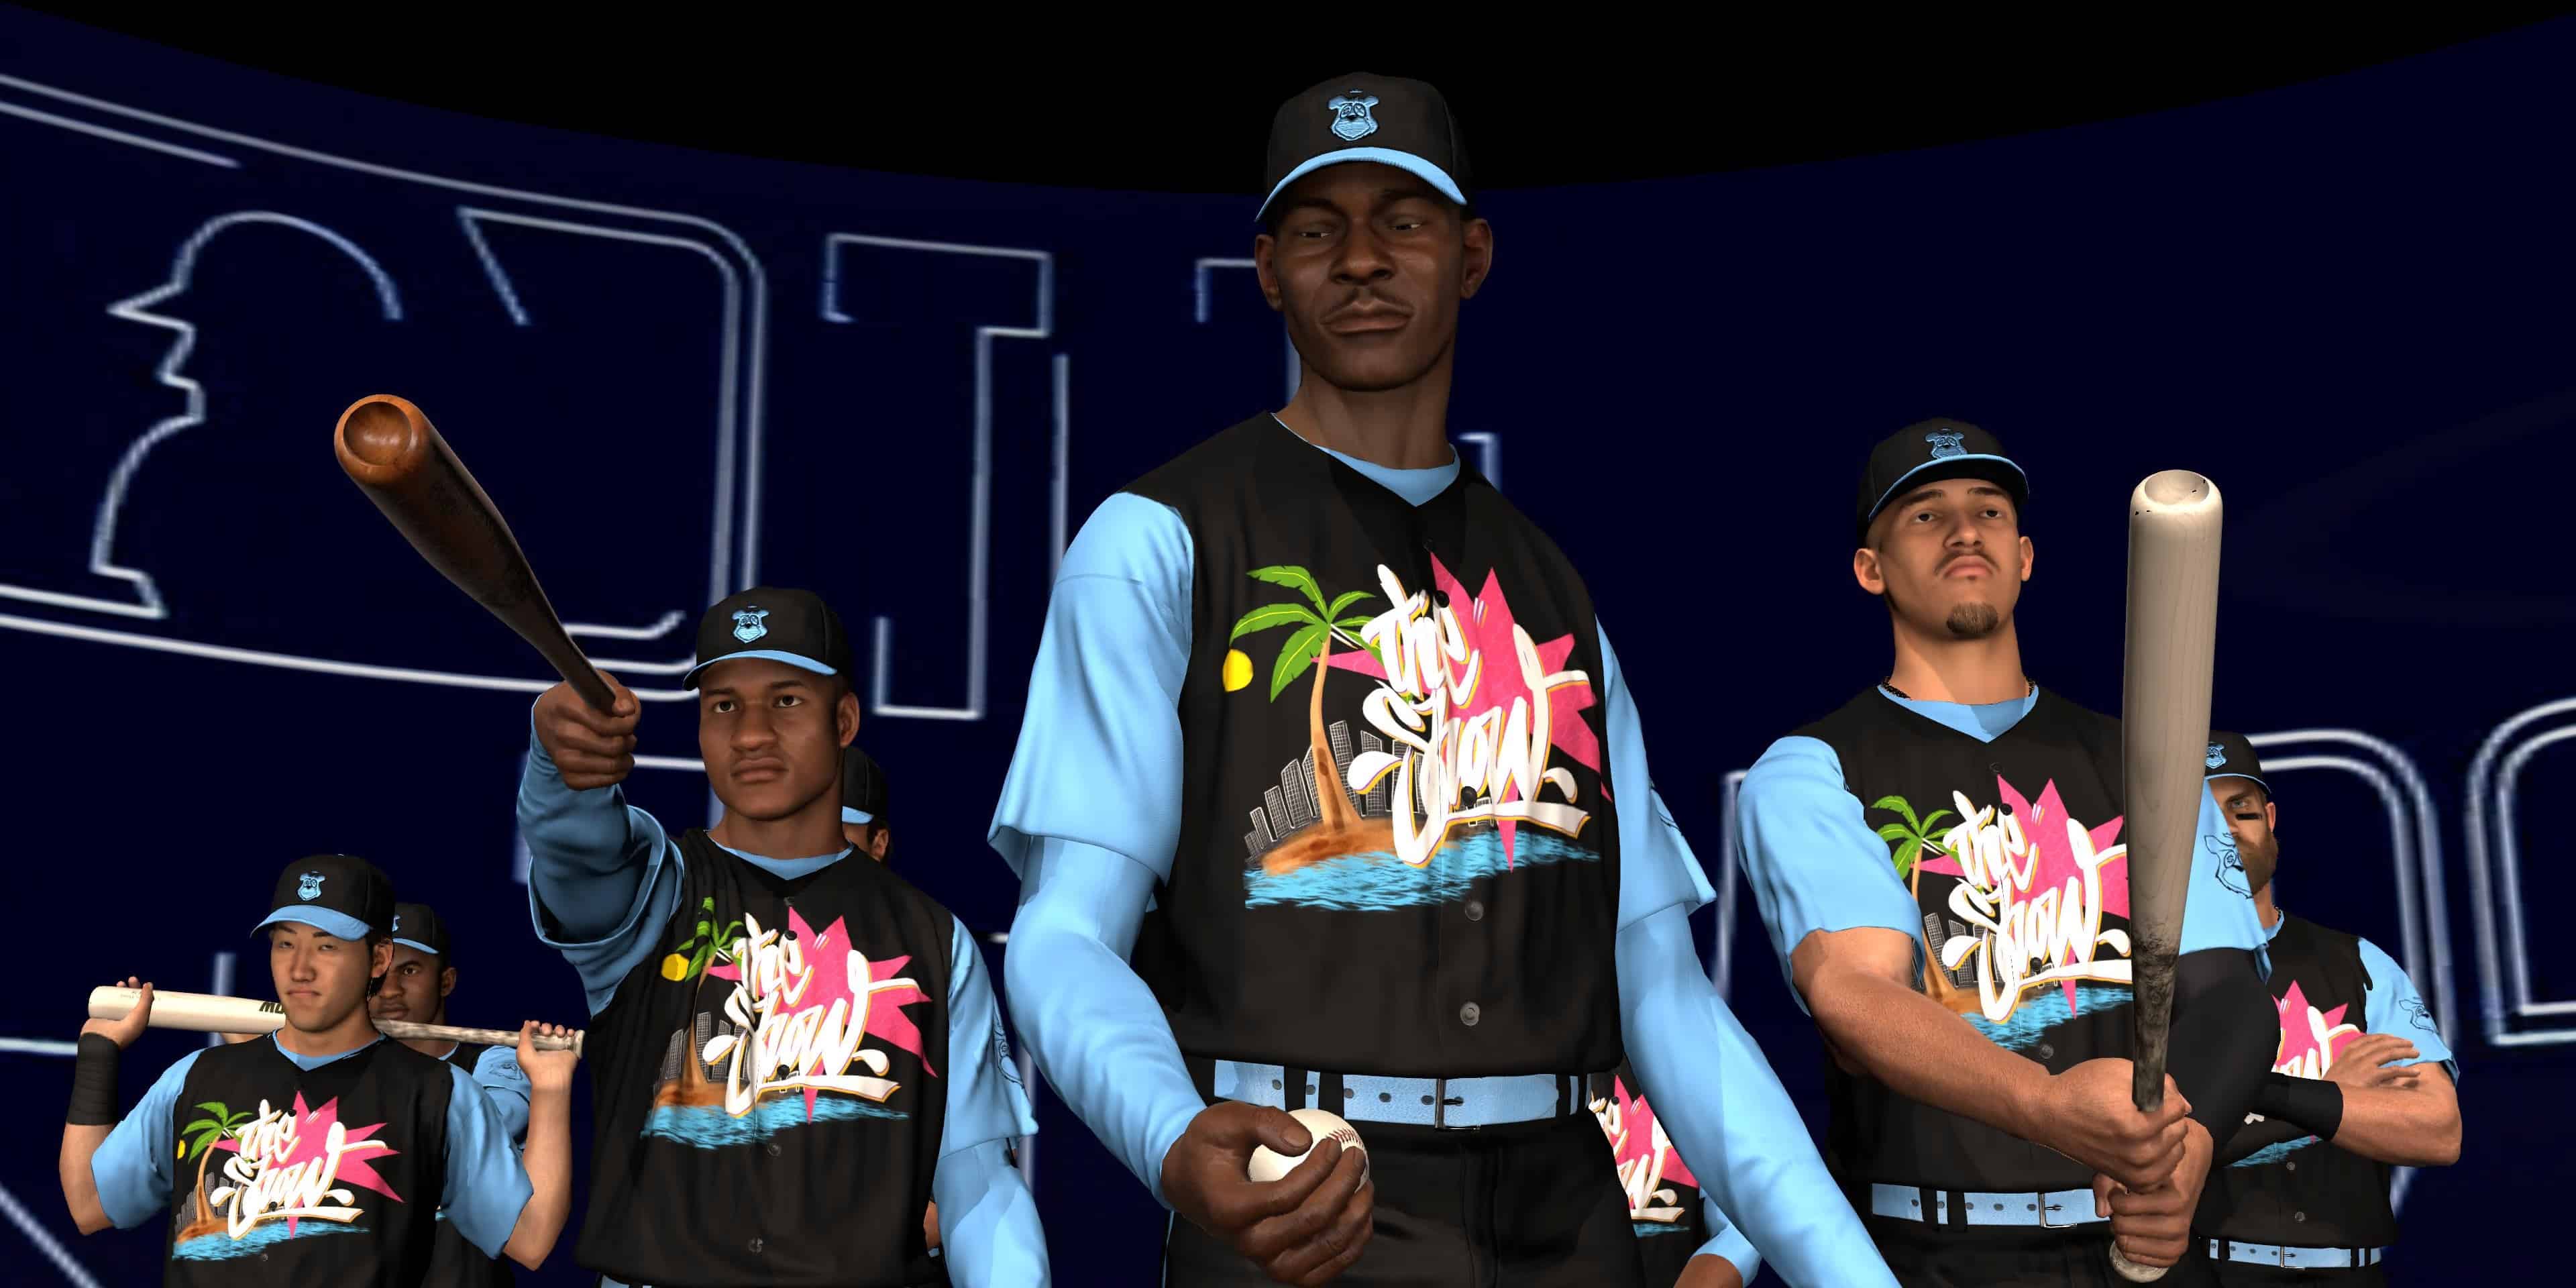 How To Customize Team Uniforms And Team Names In Diamond Dynasty